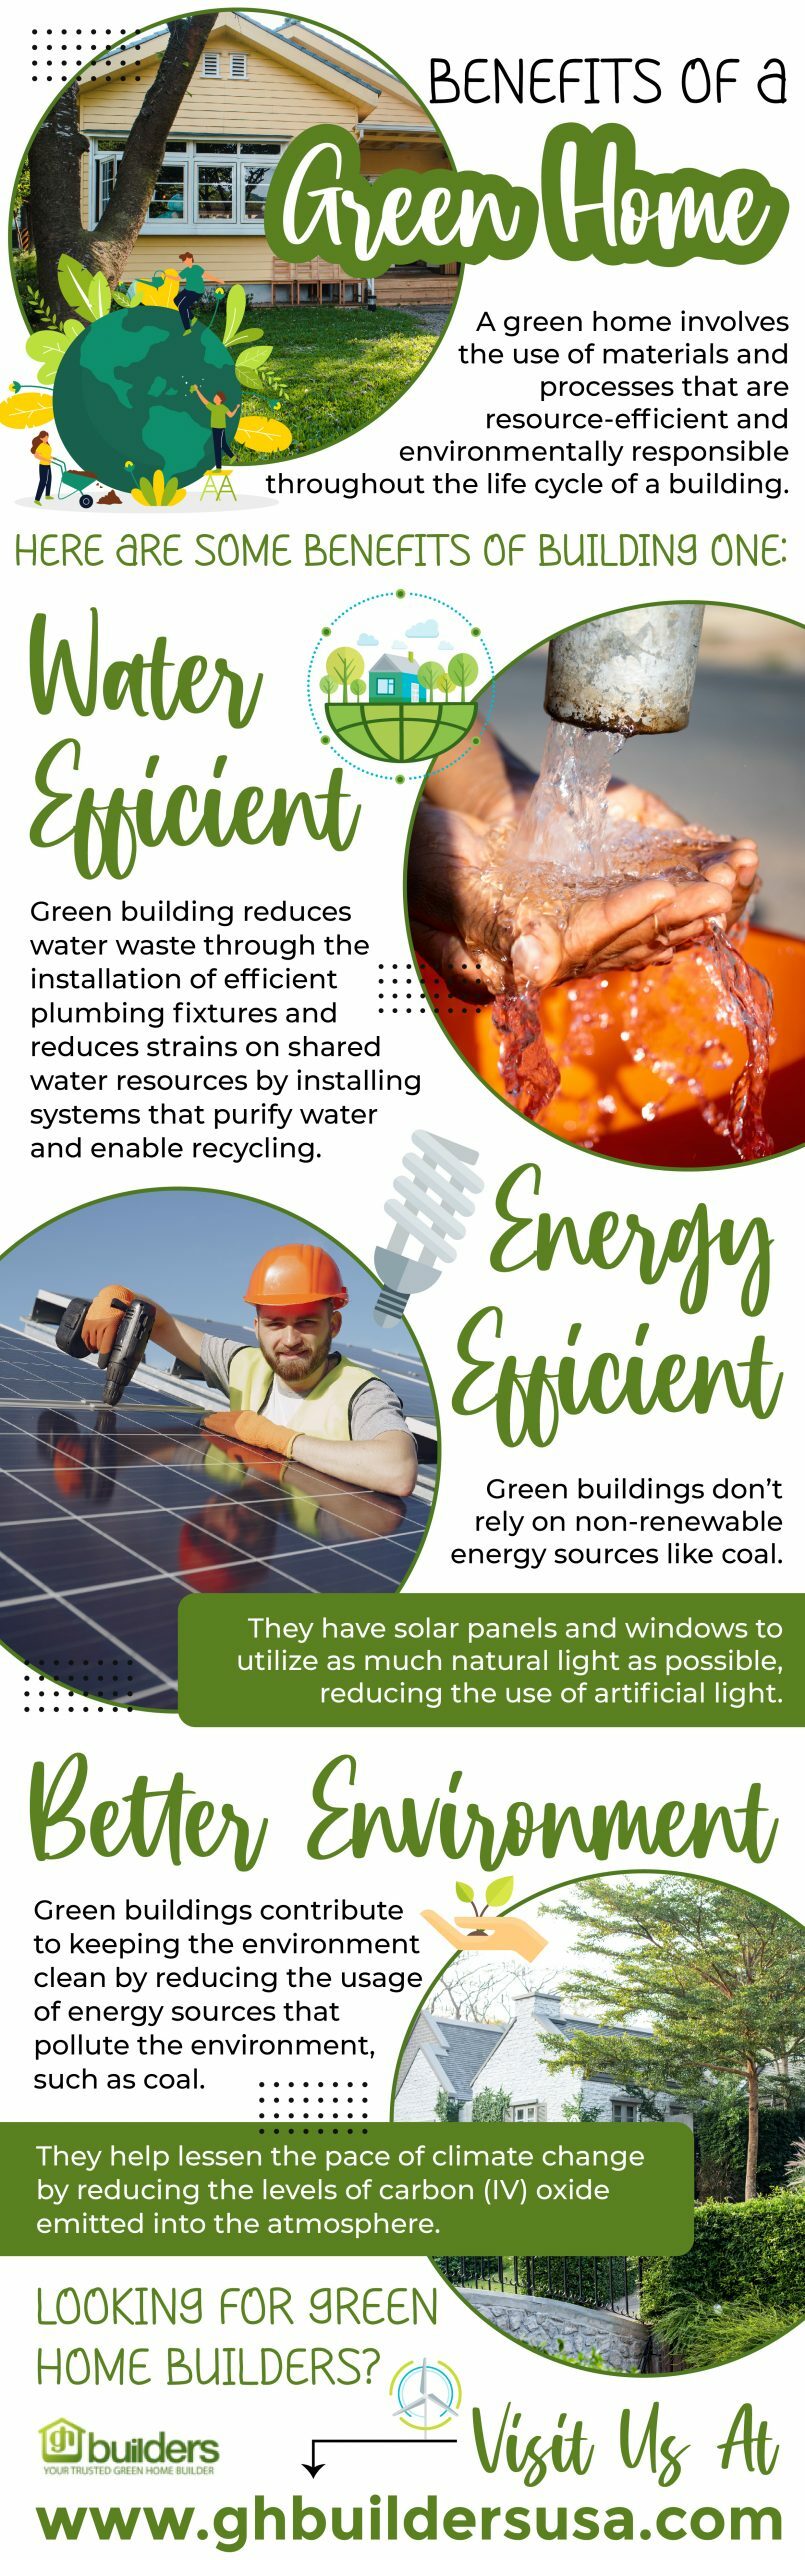 Benefits of a Green Home